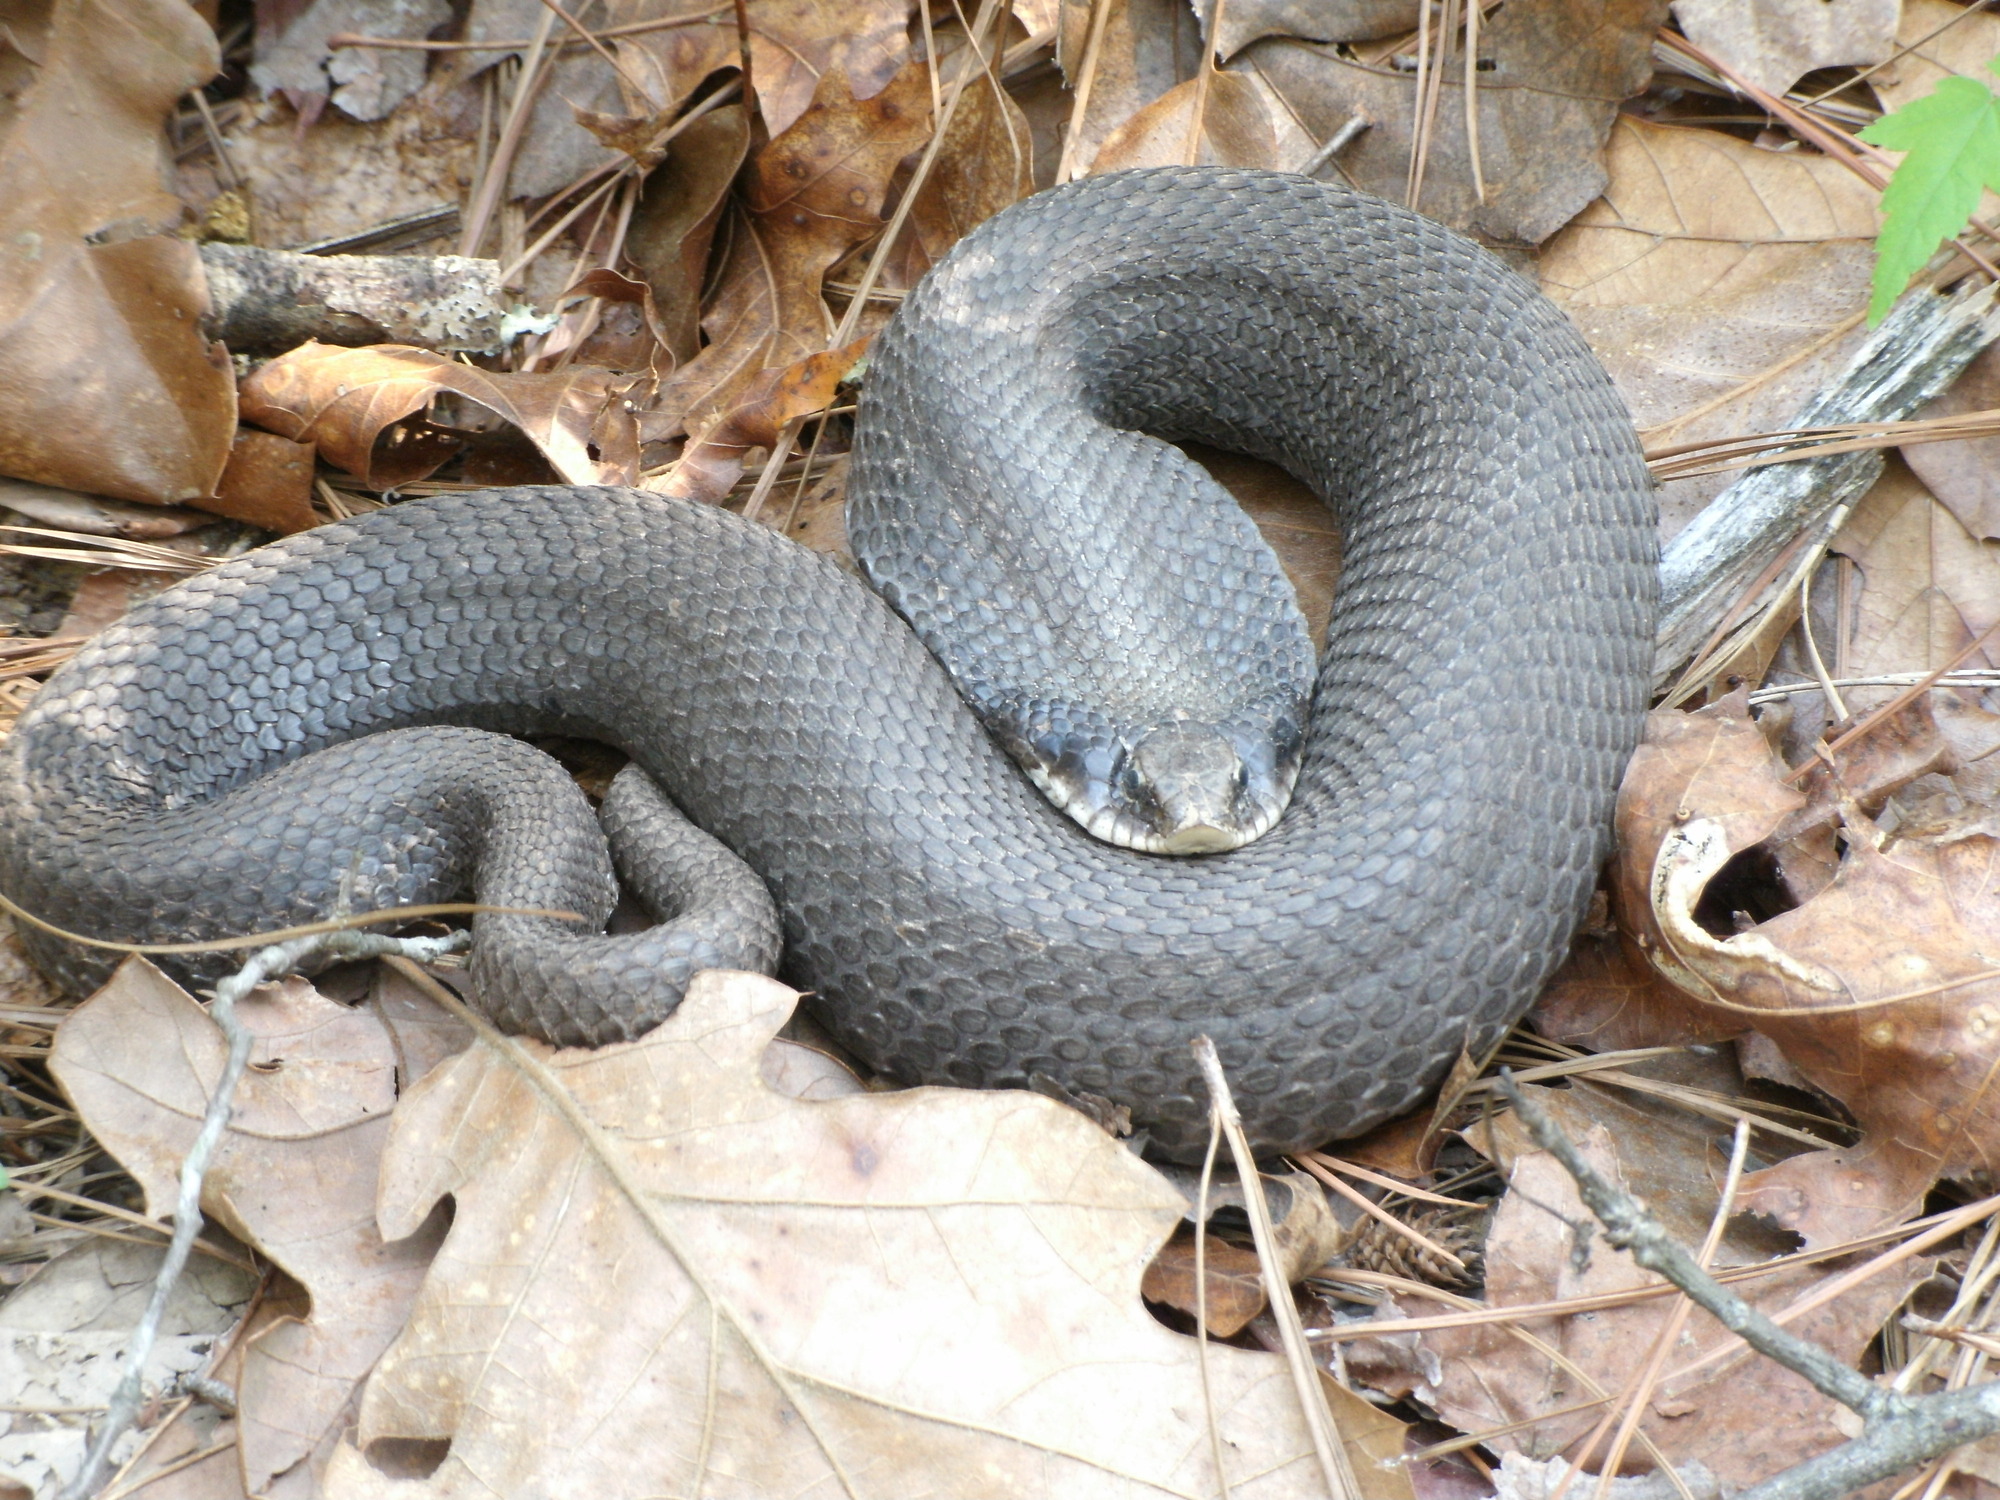 Coiled Grass Snake playing dead by lying upside down with